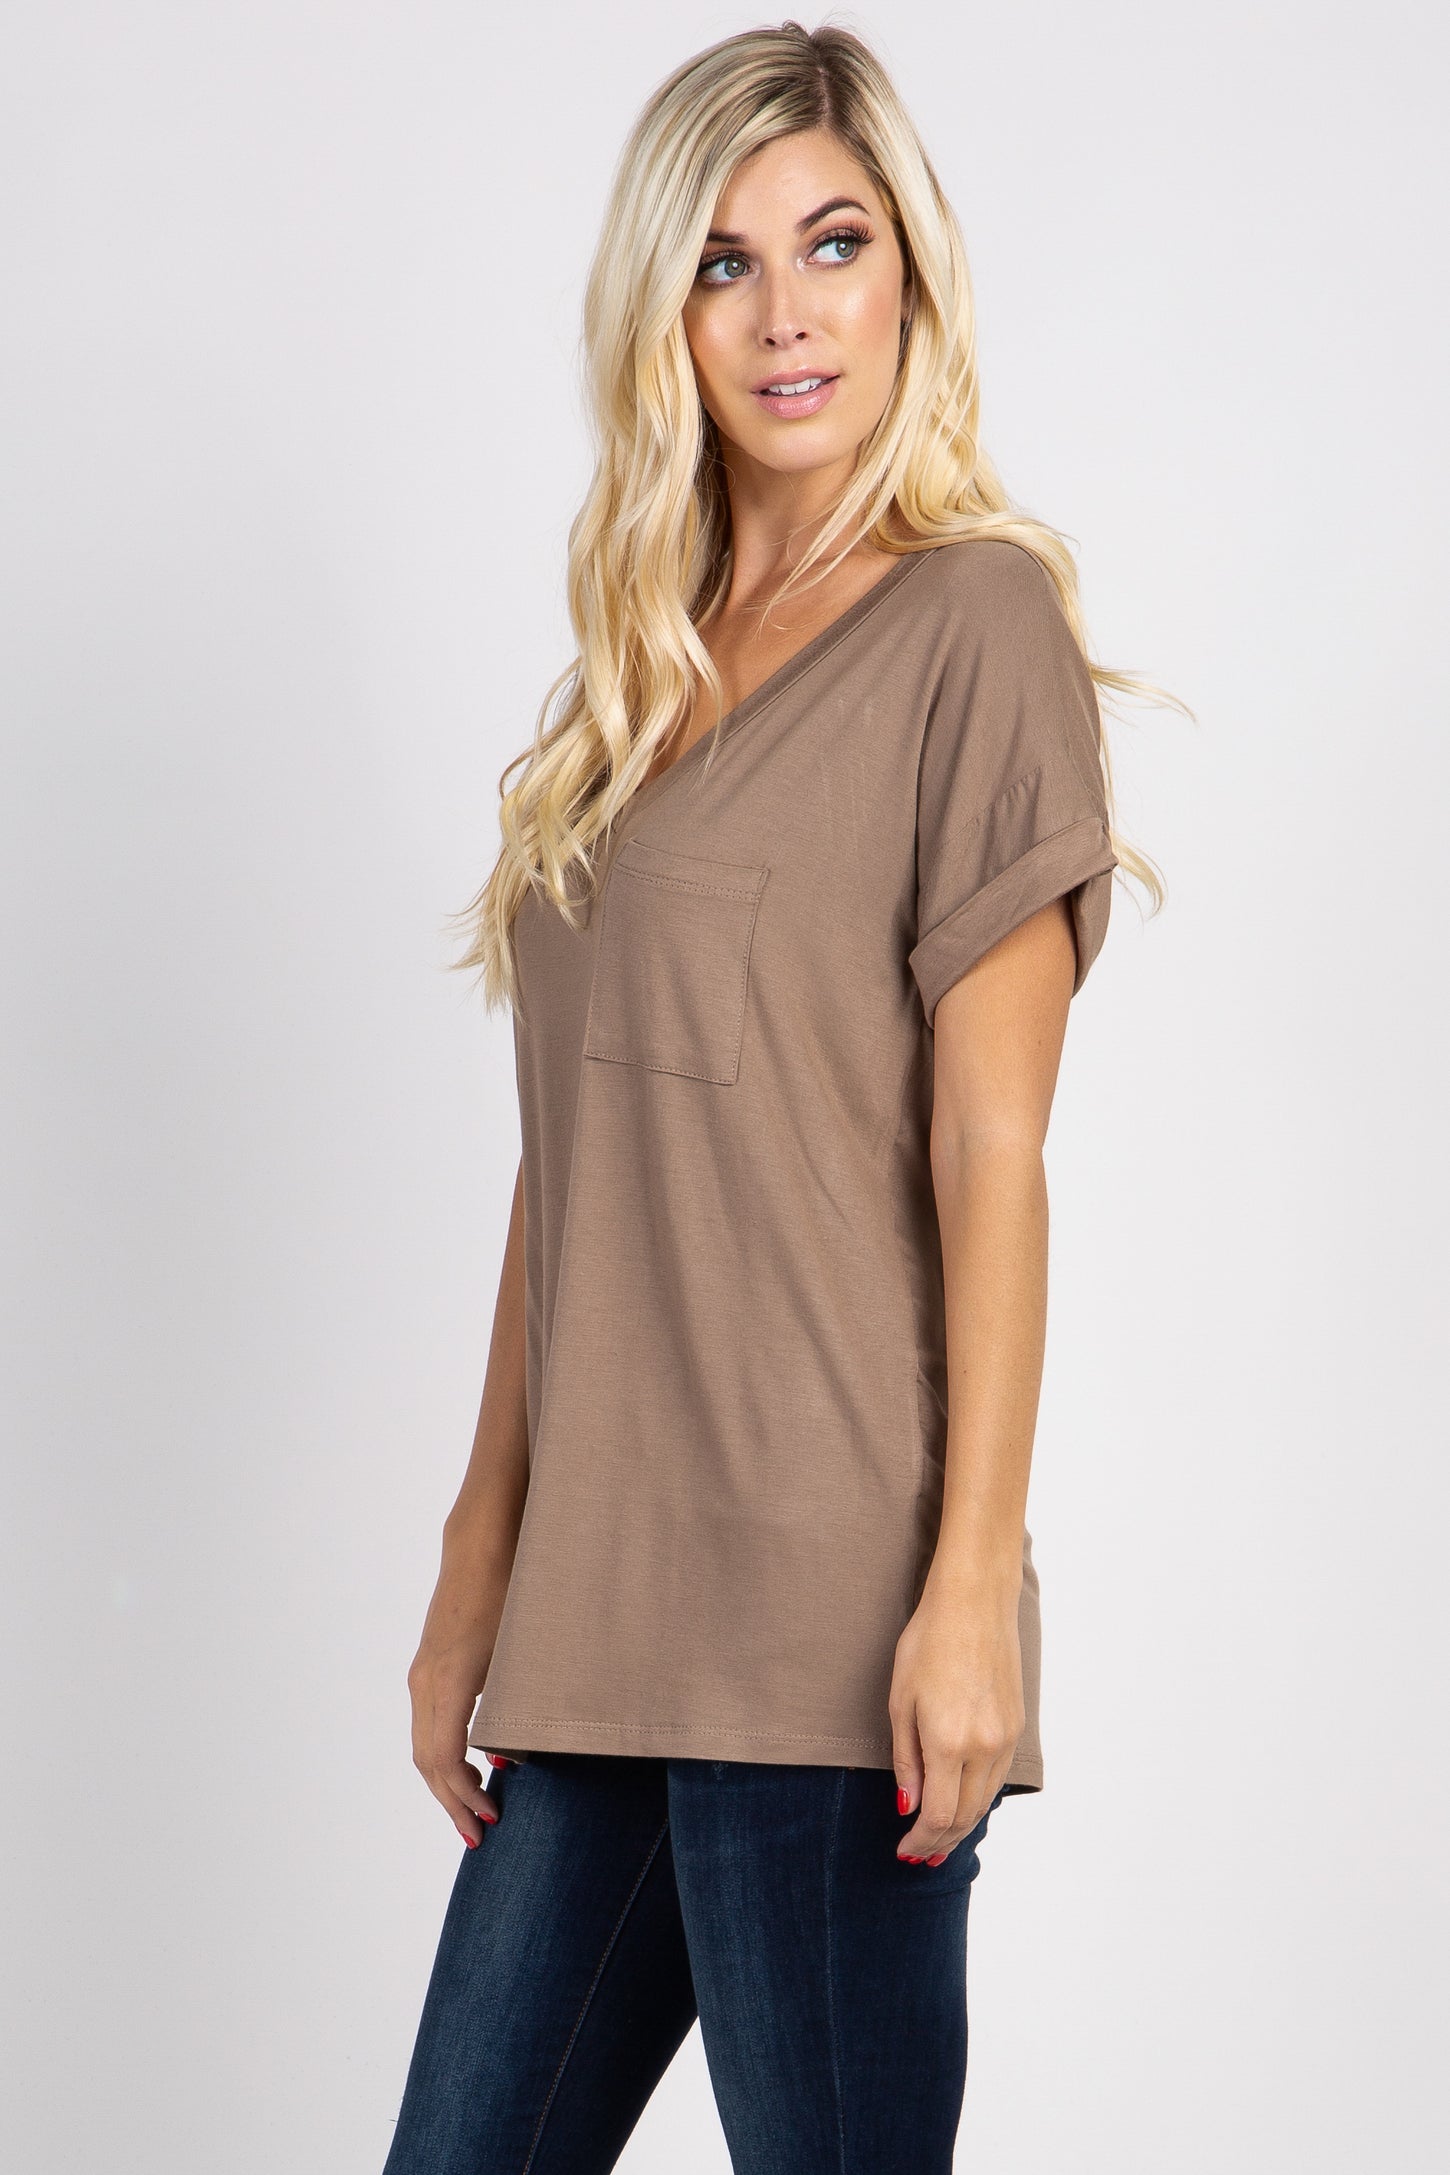 Taupe Solid Pocket Top